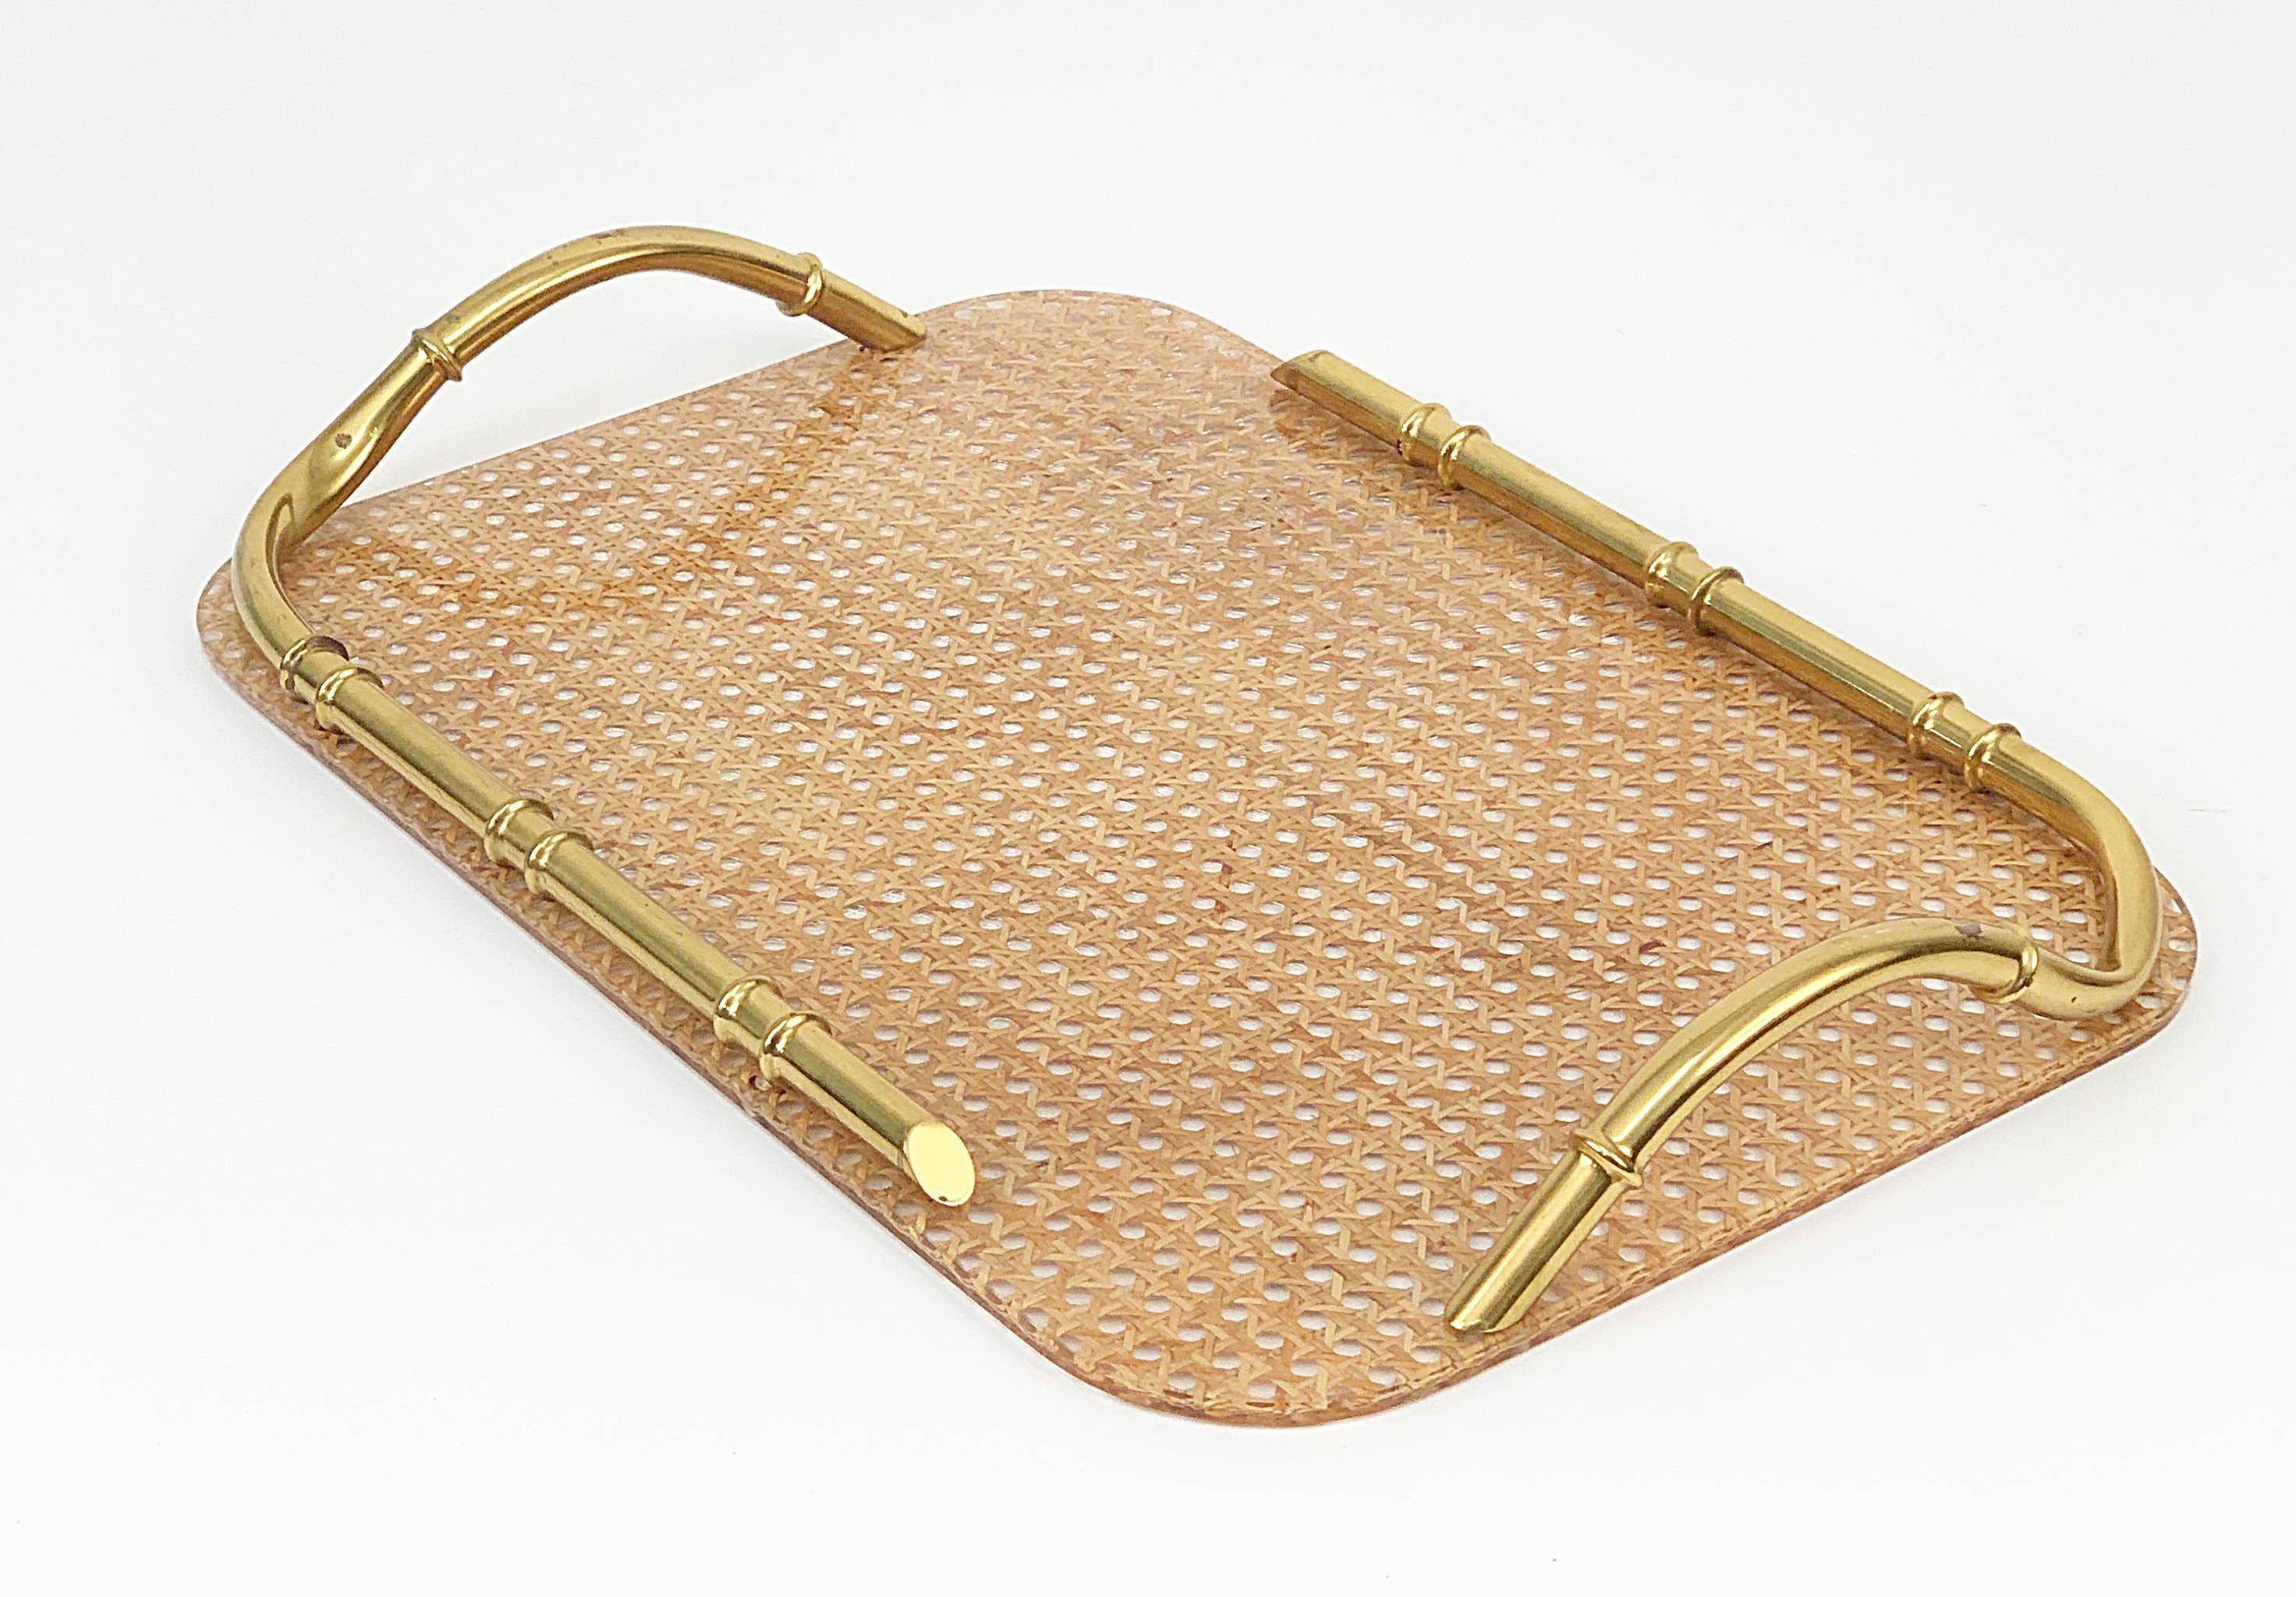 Acrylic Midcentury Brass Lucite and Faux Bamboo Serving Tray Christian Dior Style, 1970s